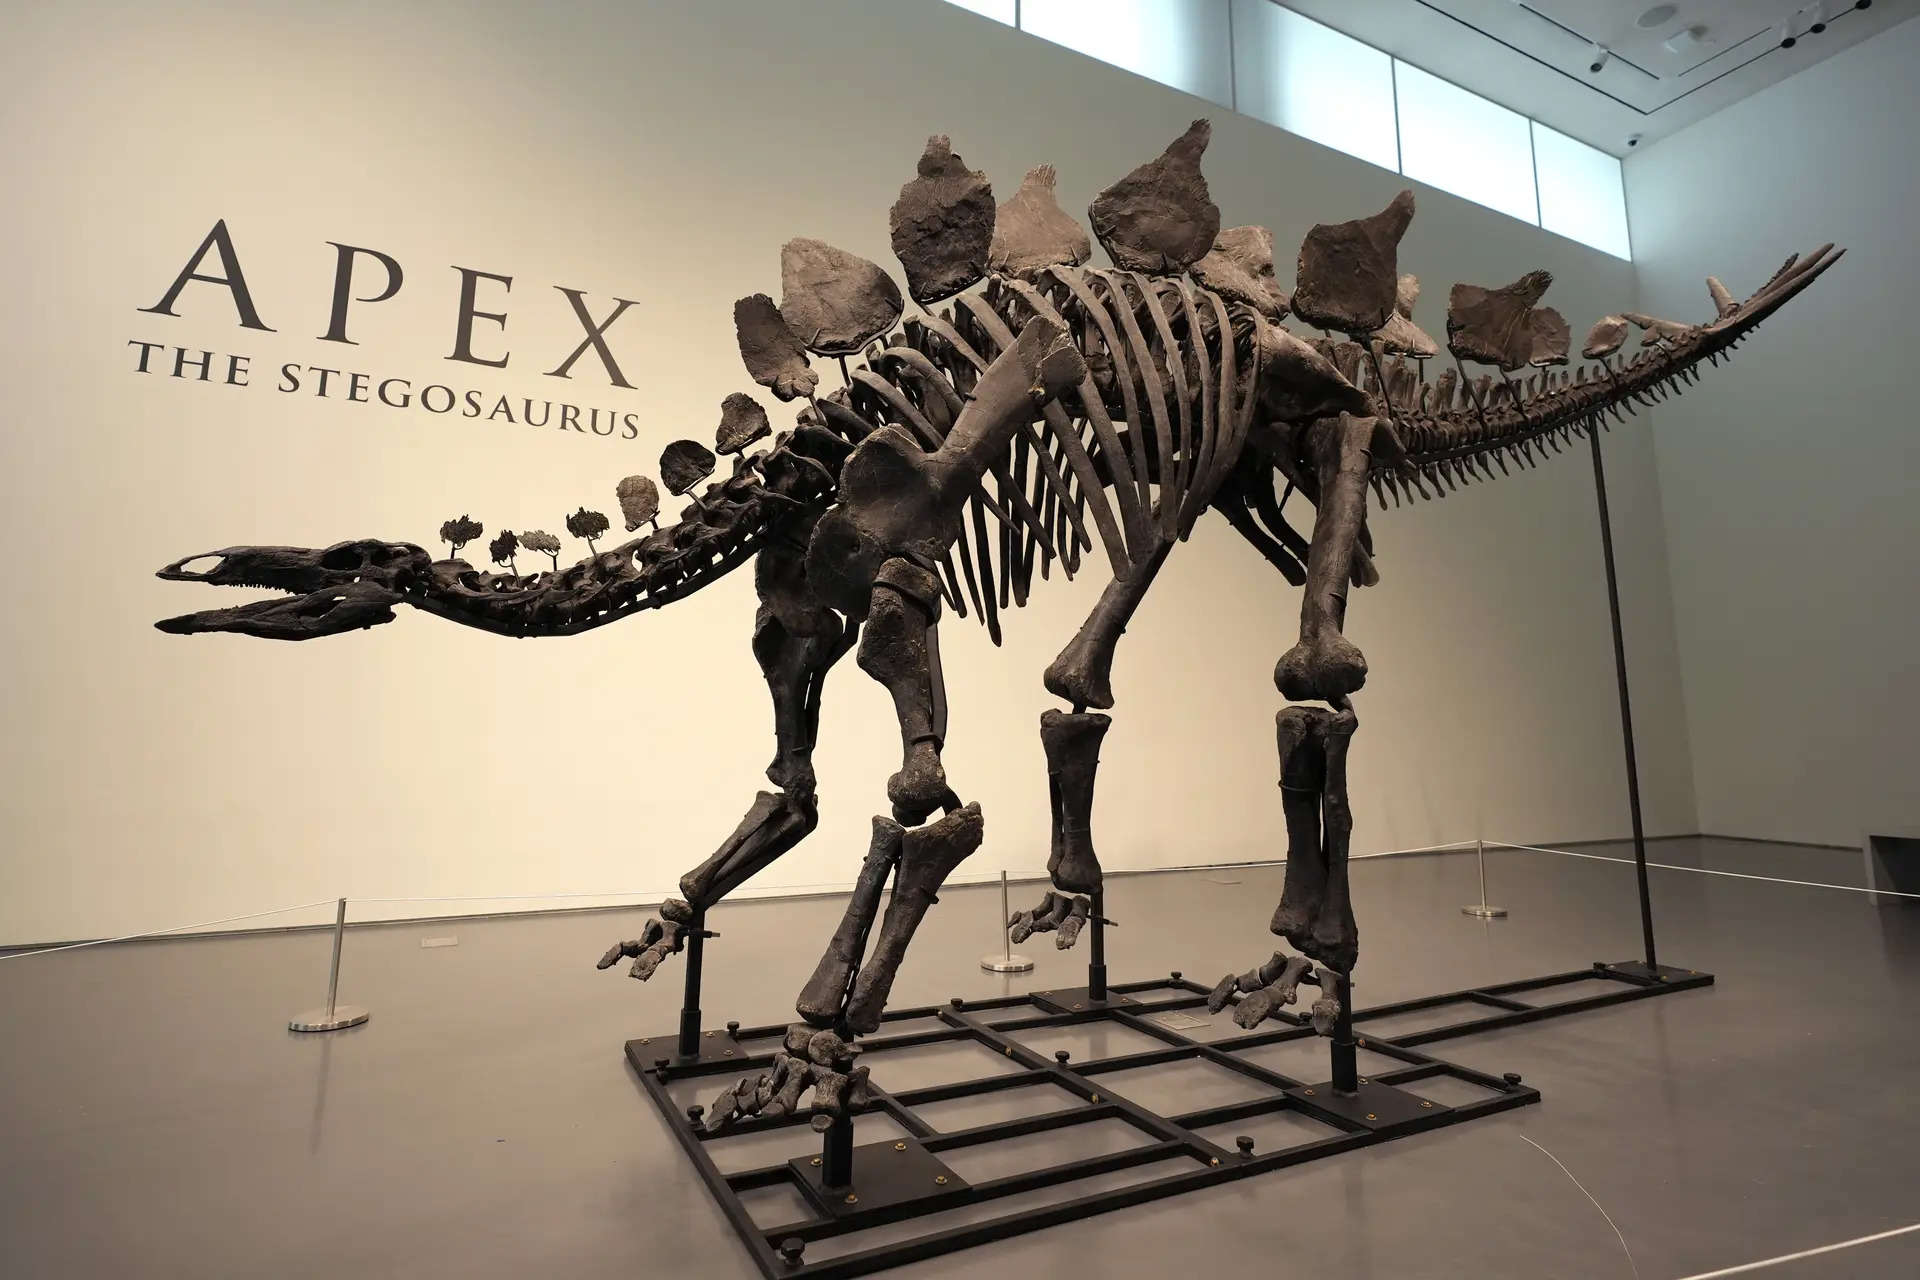 Stegosaurus skeleton 'Apex' sells for record $44.6 million. Why is it so expensive? 